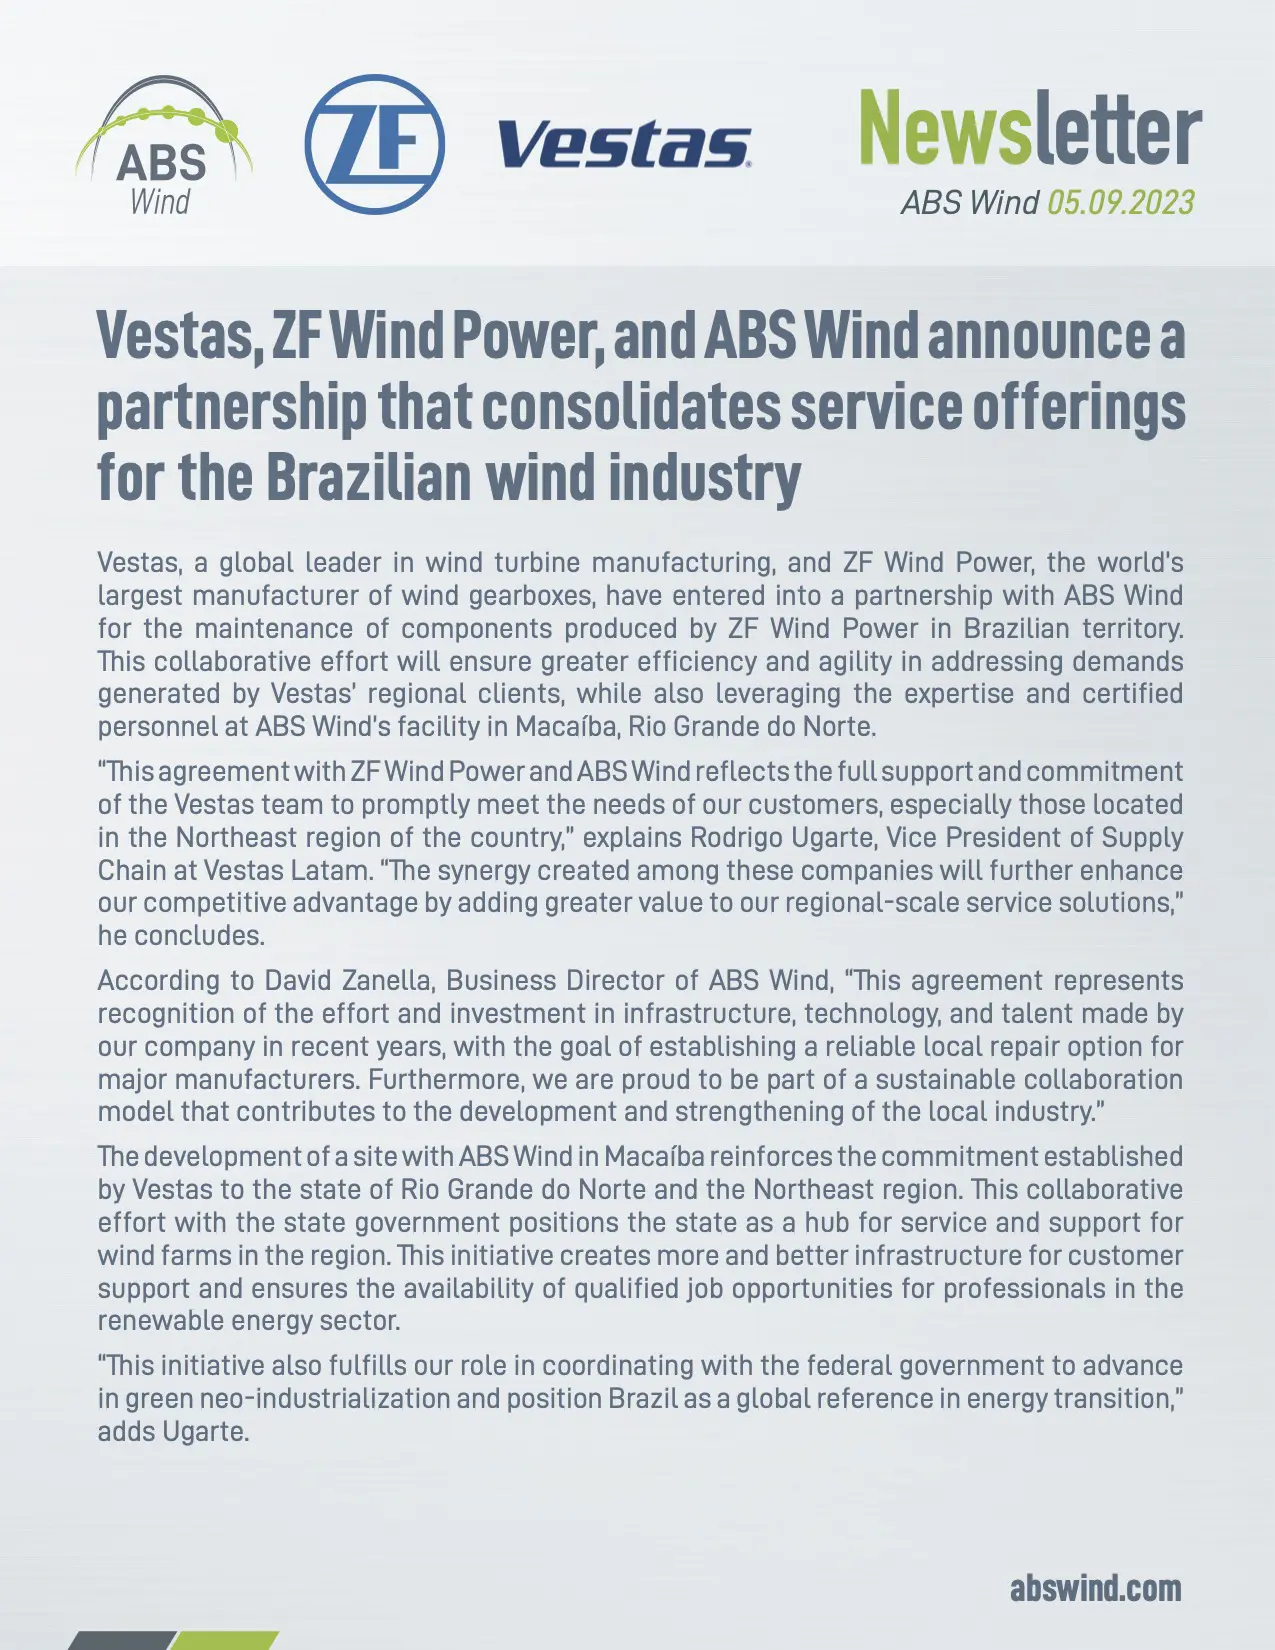 ABS WIND, Vestas and ZF partnership